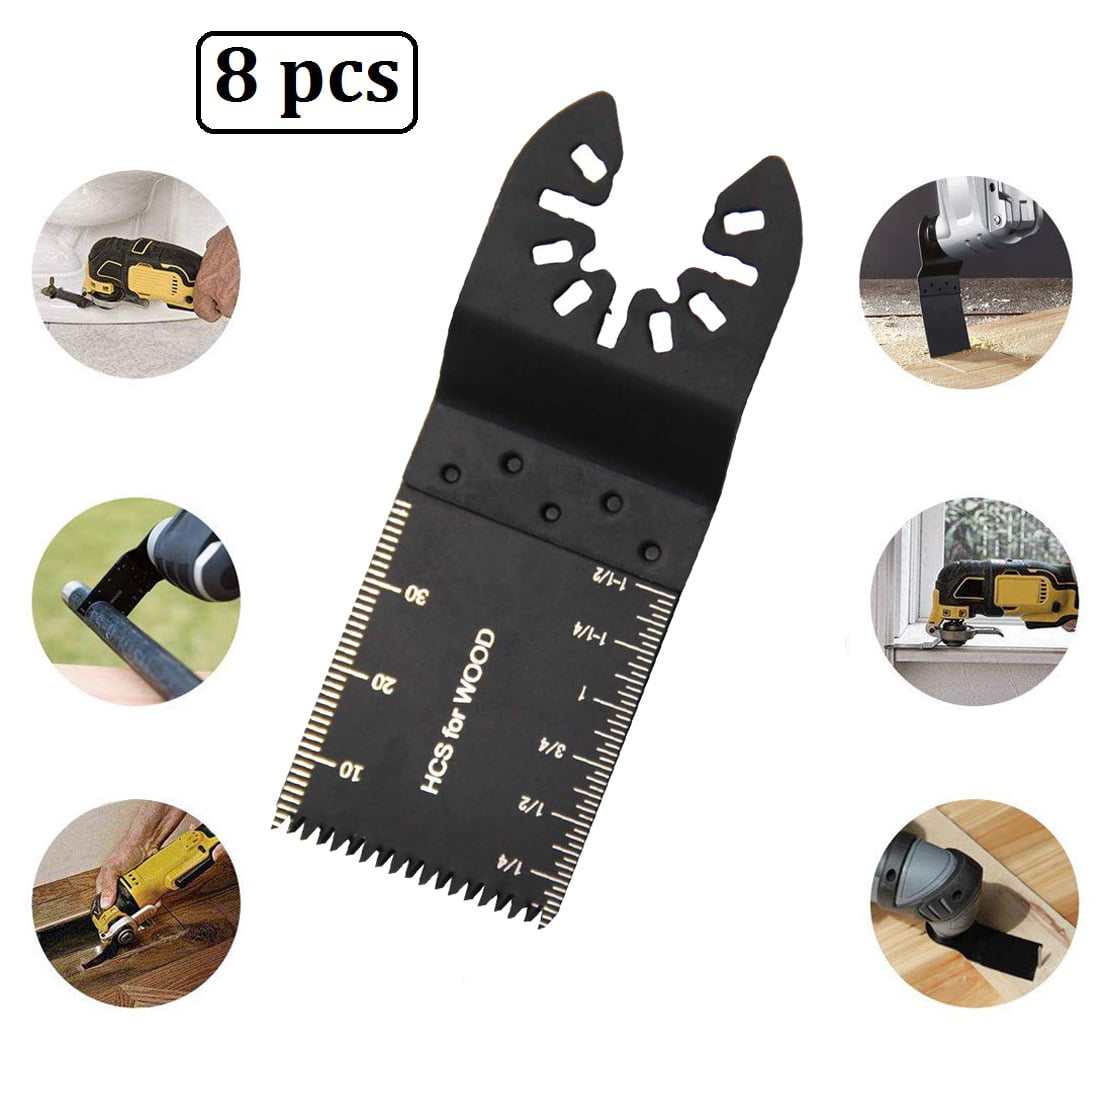 20pcs Profession Saw Blades Oscillating Multi Tool Accessories Kit For Cutting